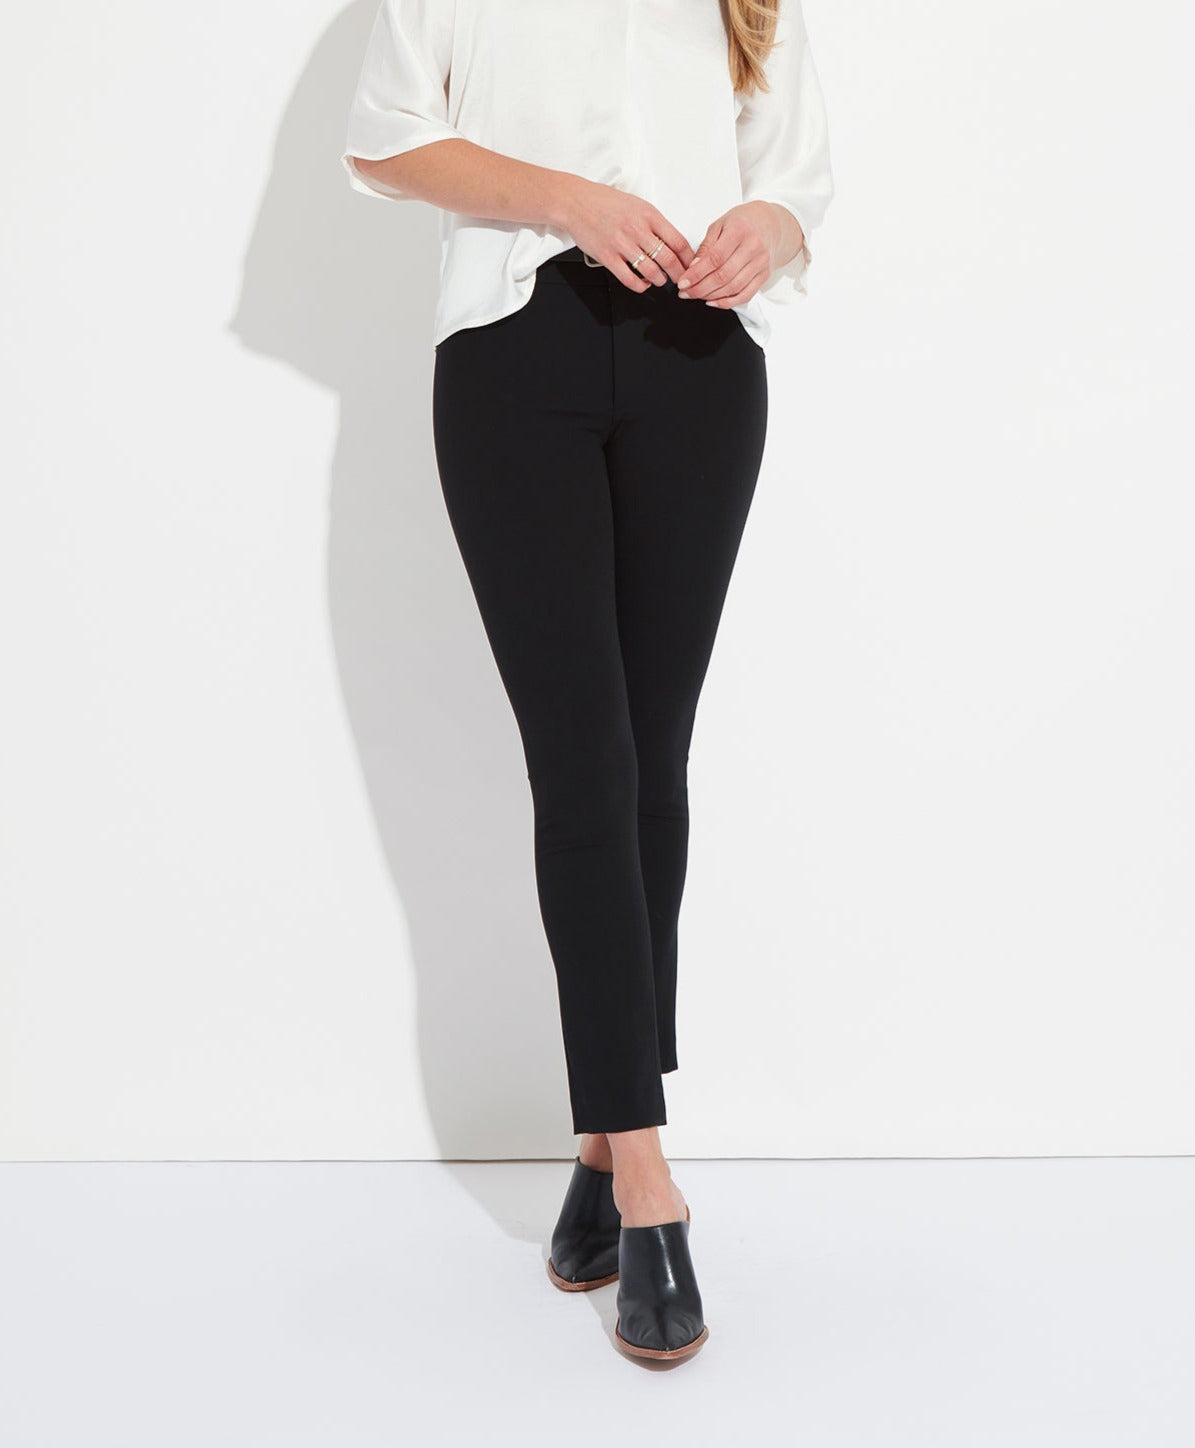 Shop Stretch High-Rise Skinny Pants from The Reset